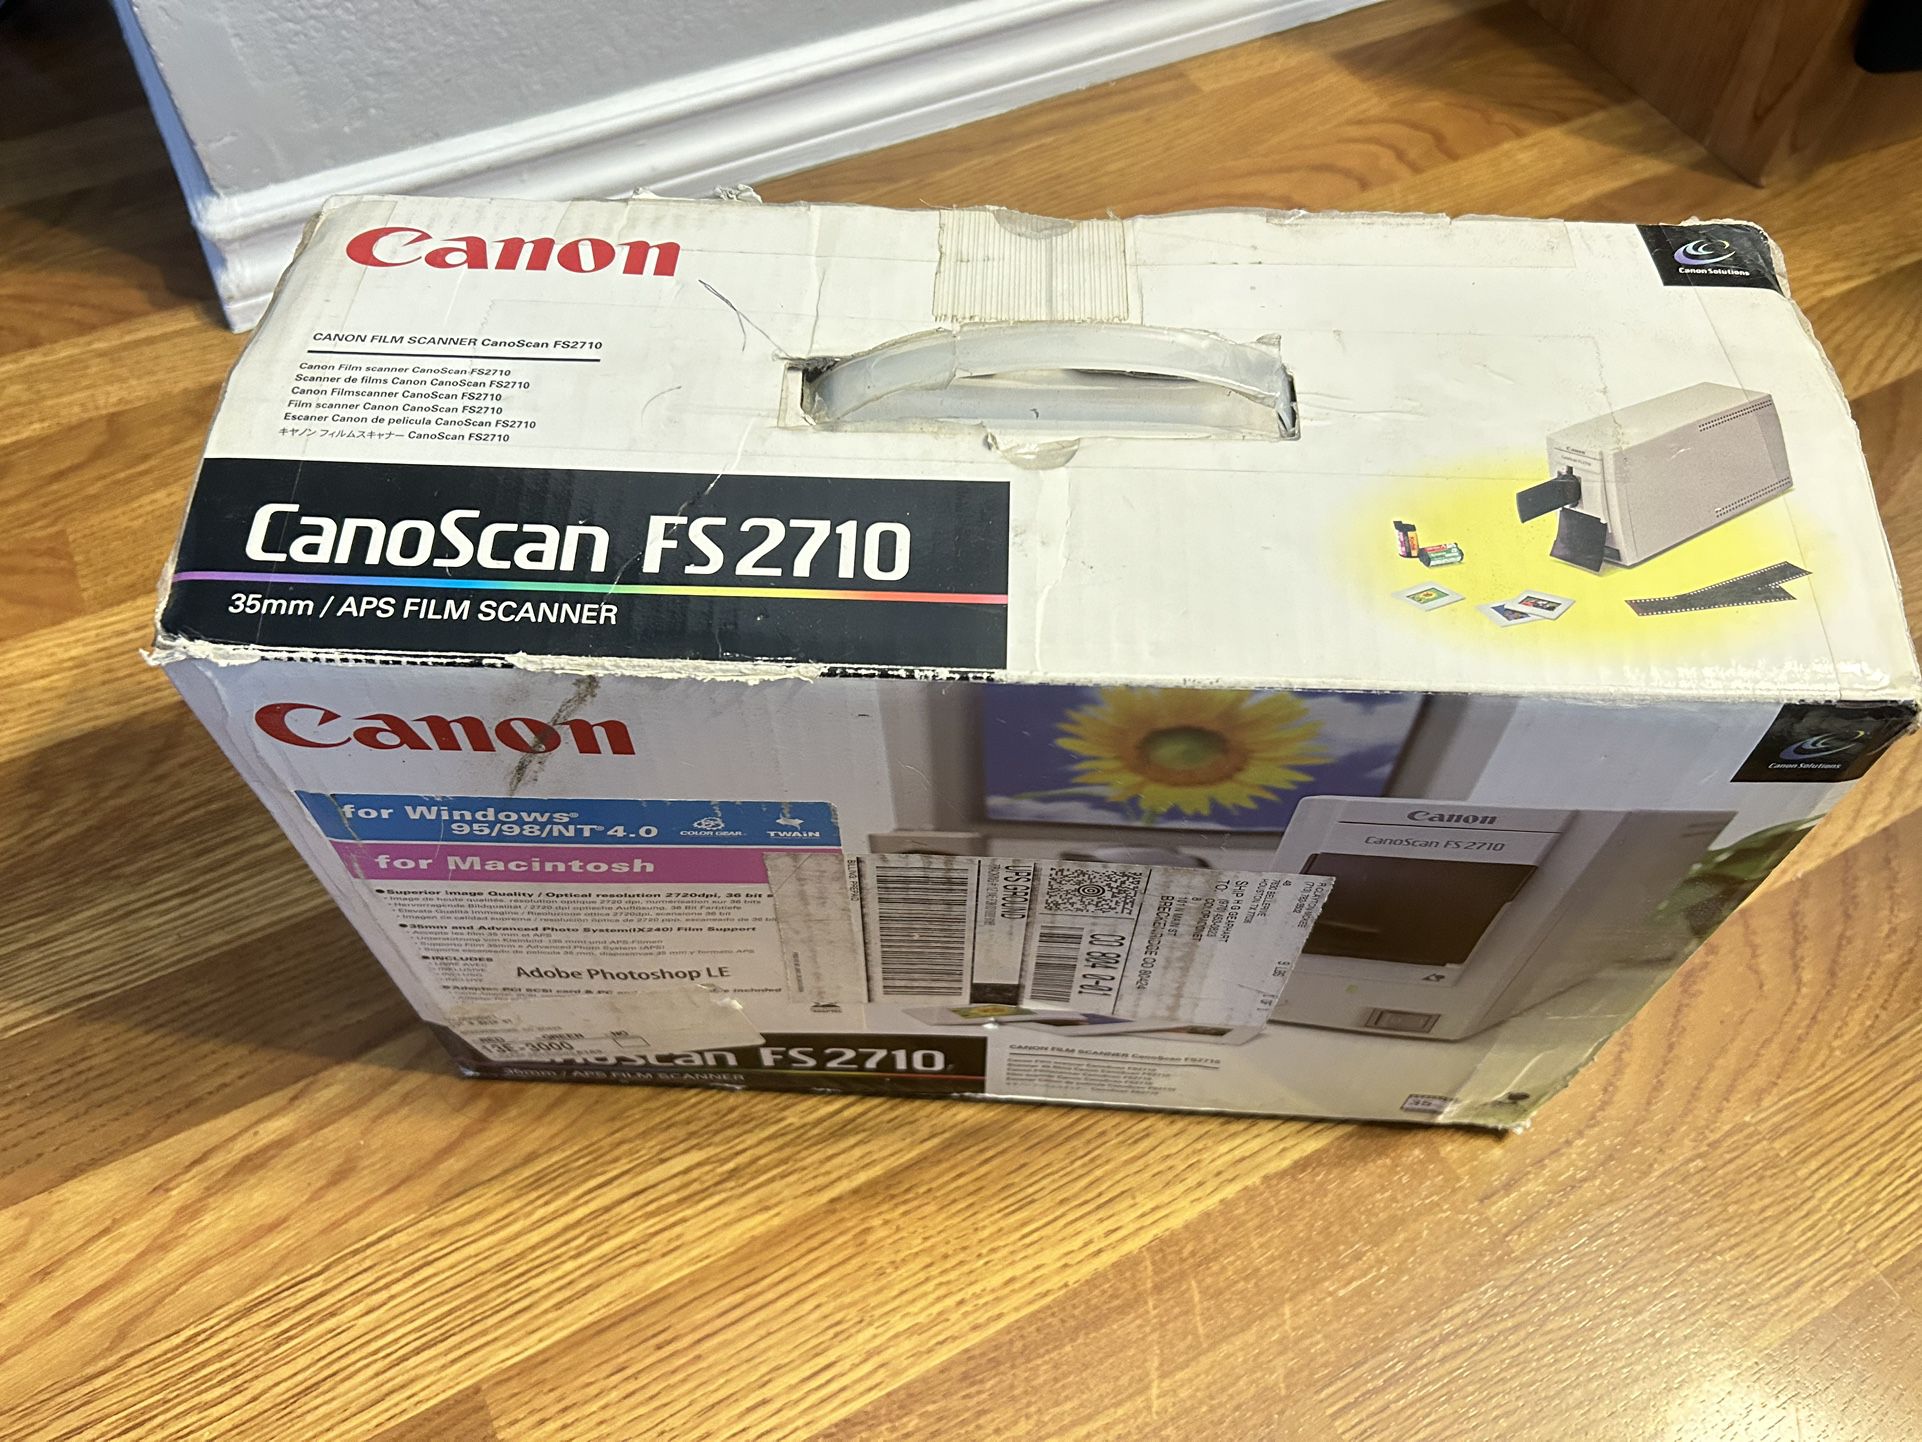 Canon CanoScan FS2710 Film Scanner with Box